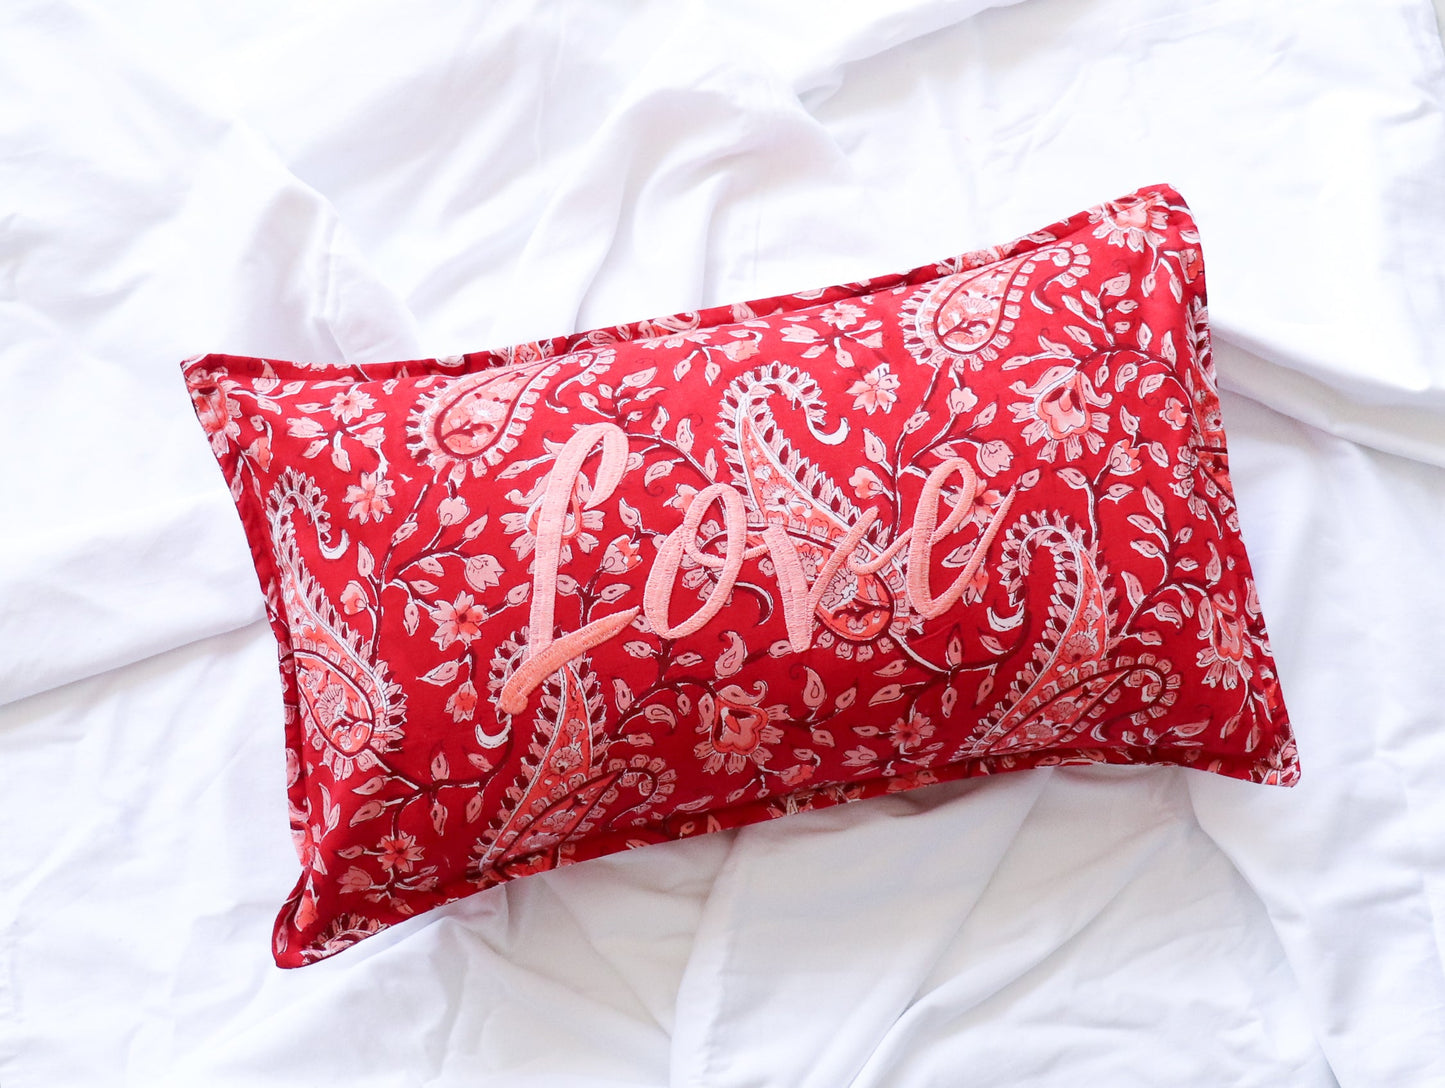 Love Block print Word Pillow - Embroidery on Block print fabric - 12x20 inches